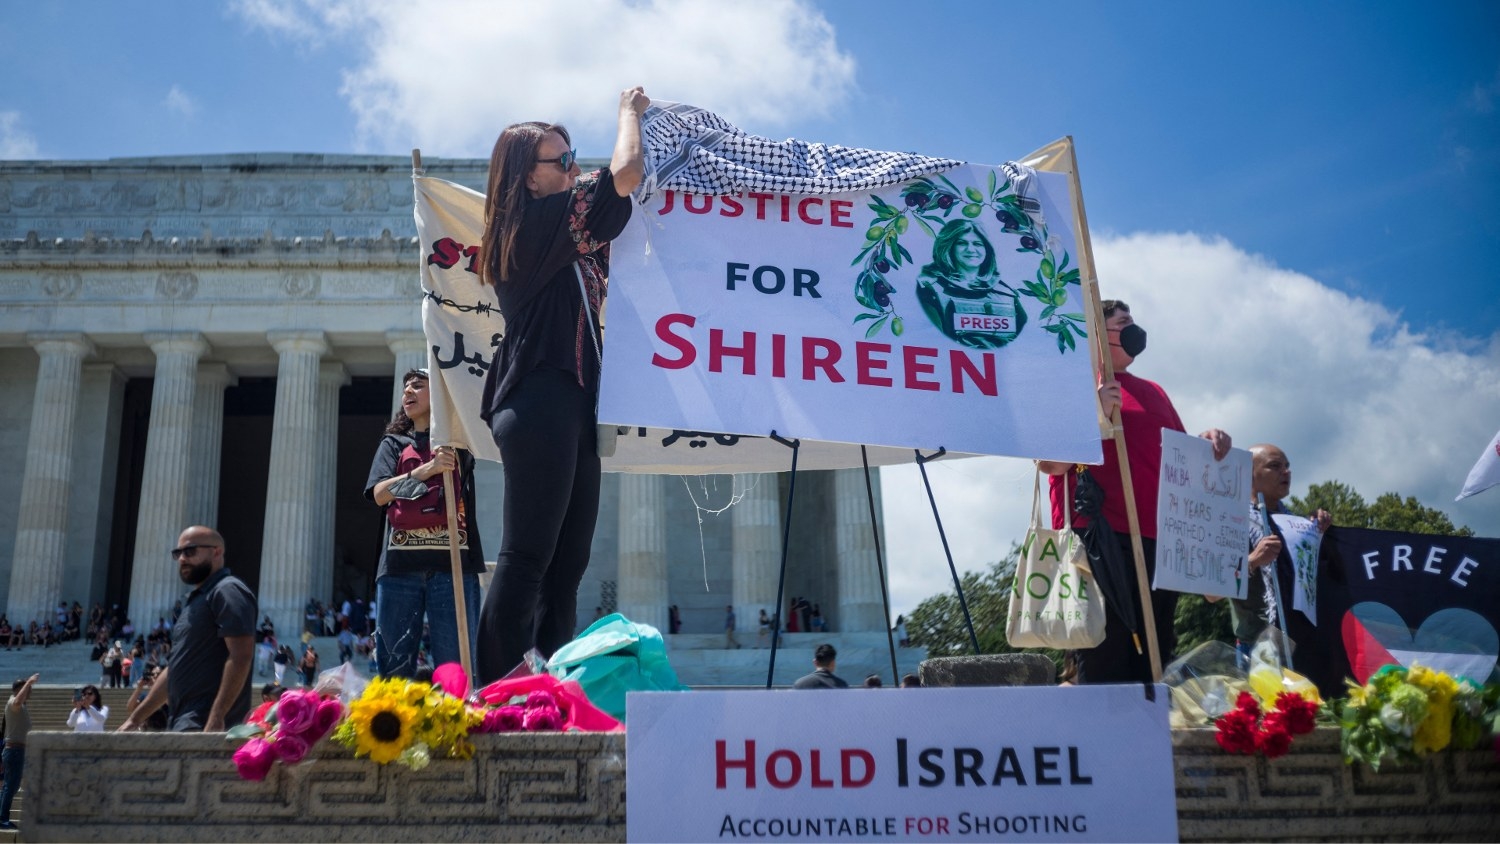 A woman drapes a keffiyeh on a banner calling for justice for Shireen Abu Akleh during a rally in Washington, DC on 15 May 2022.